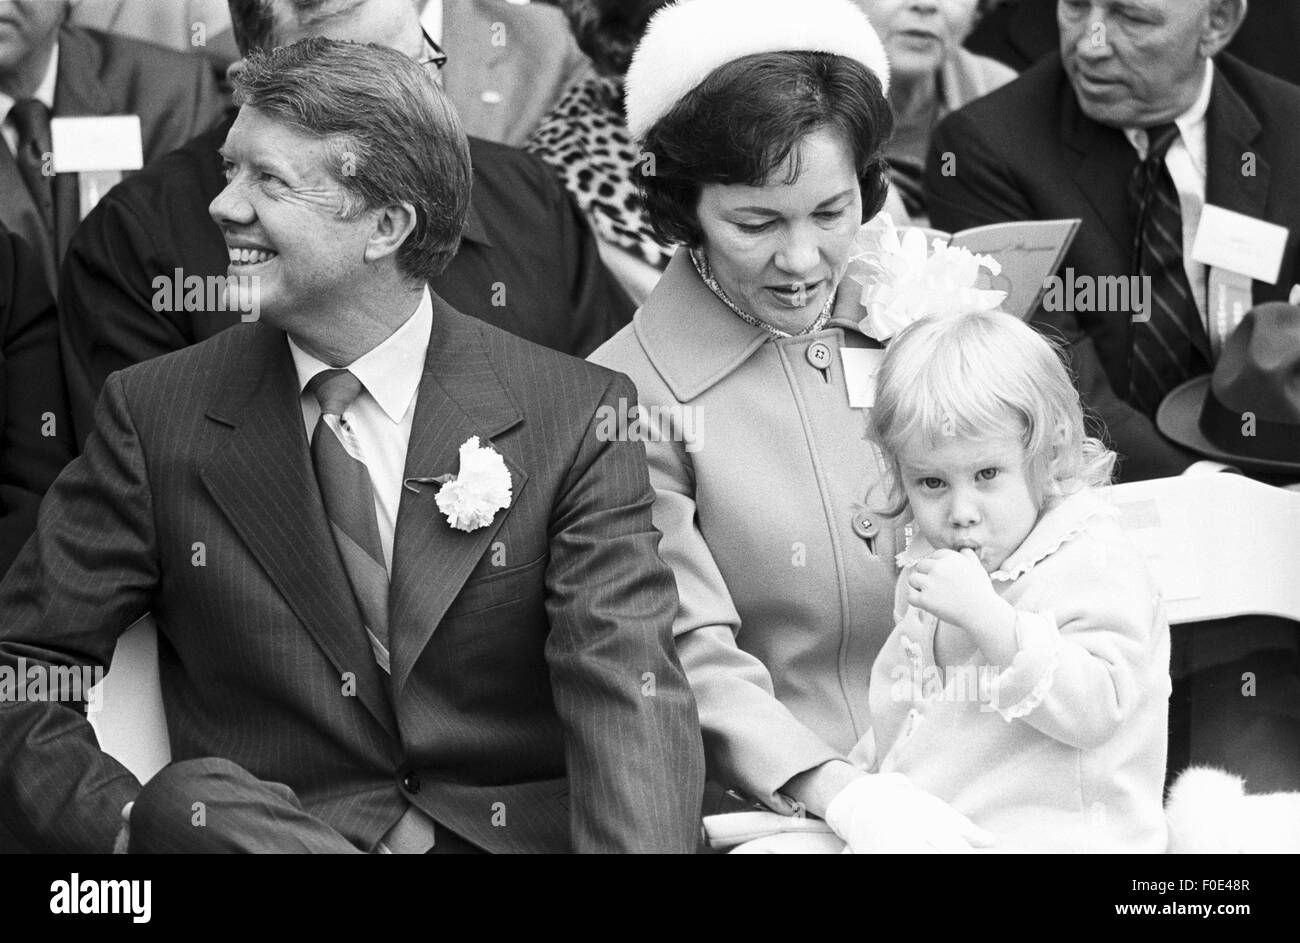 Atlanta, Georgia, USA. 1st Jan, 2015. Georgia state senator and governor elect Jimmy Carter at his 1971 gubernatorial inauguration. Carter succeeded segregationist Lester Maddox as Georgia governor. Carter is seated with his wife Rosalyn and daughter Amy. © Ken Hawkins/ZUMA Wire/Alamy Live News Stock Photo